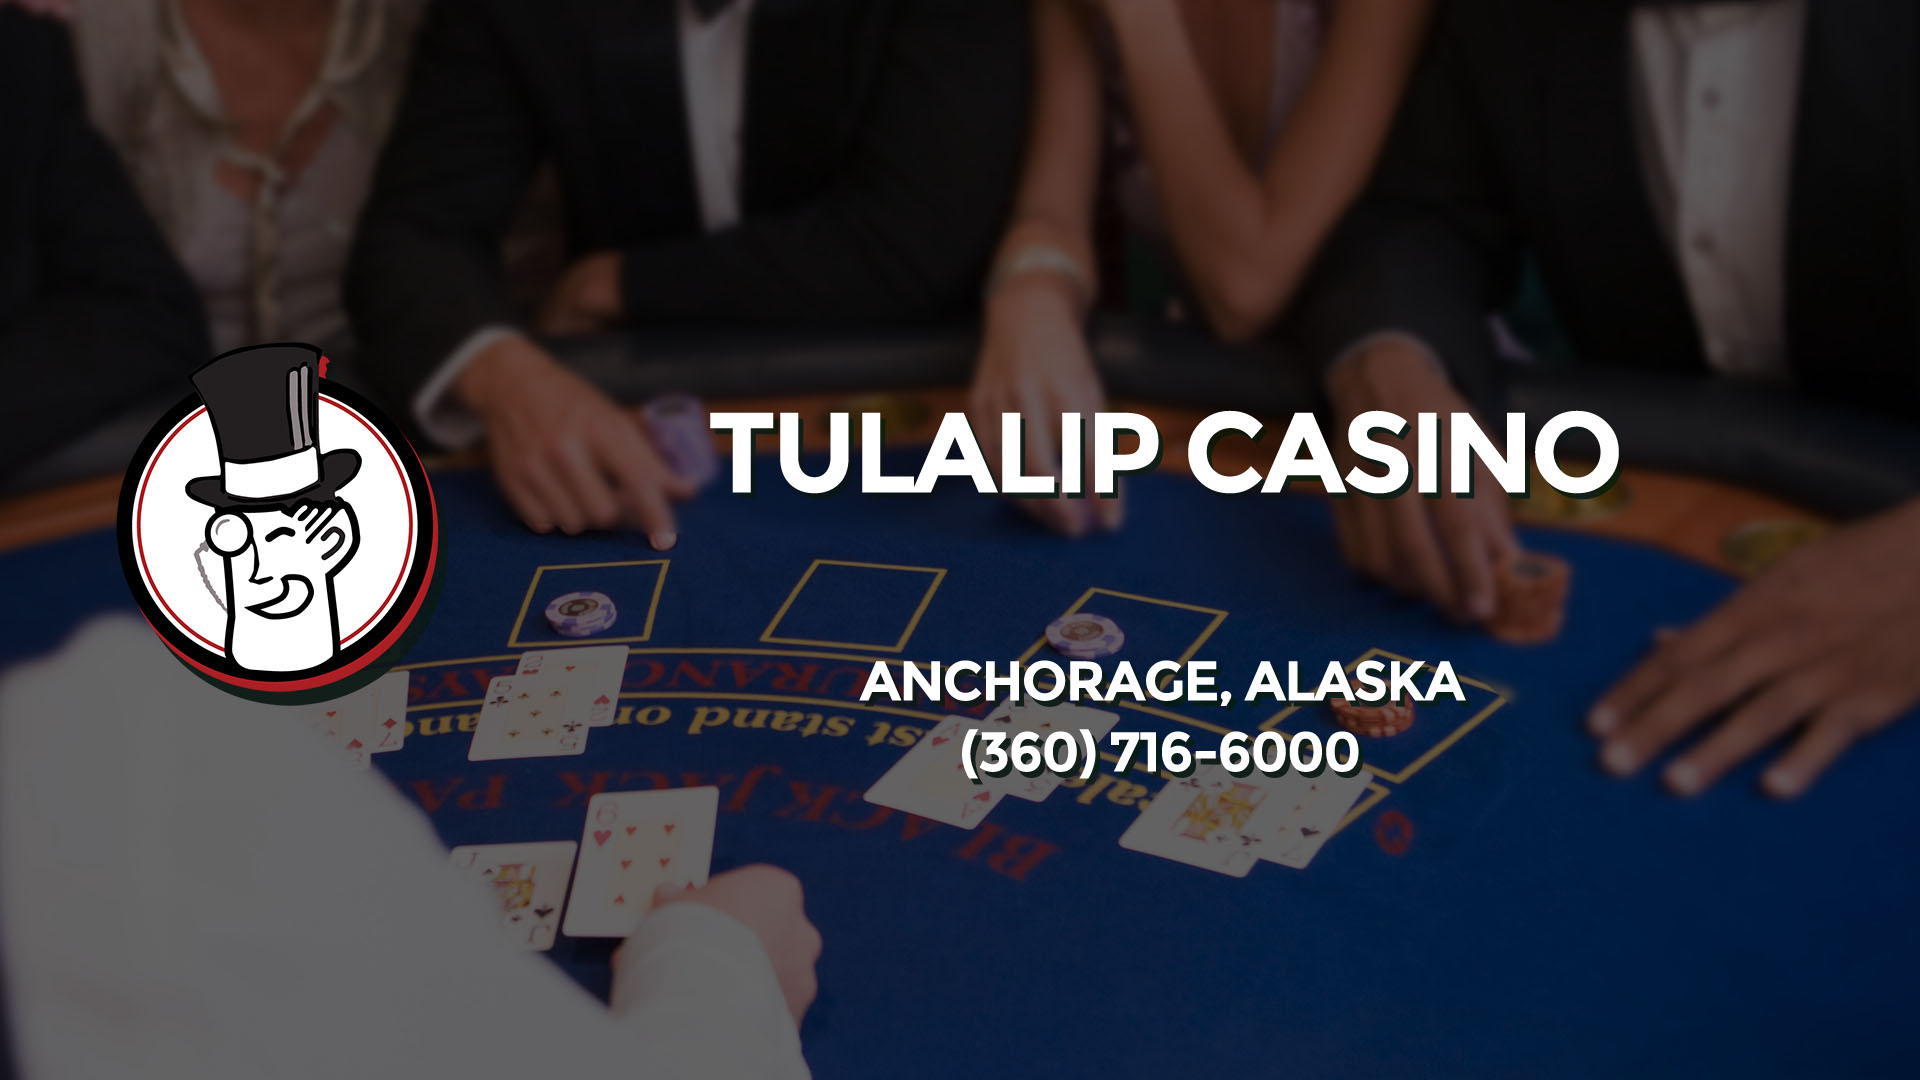 shuttle from vancouver airport to tulalip casinos